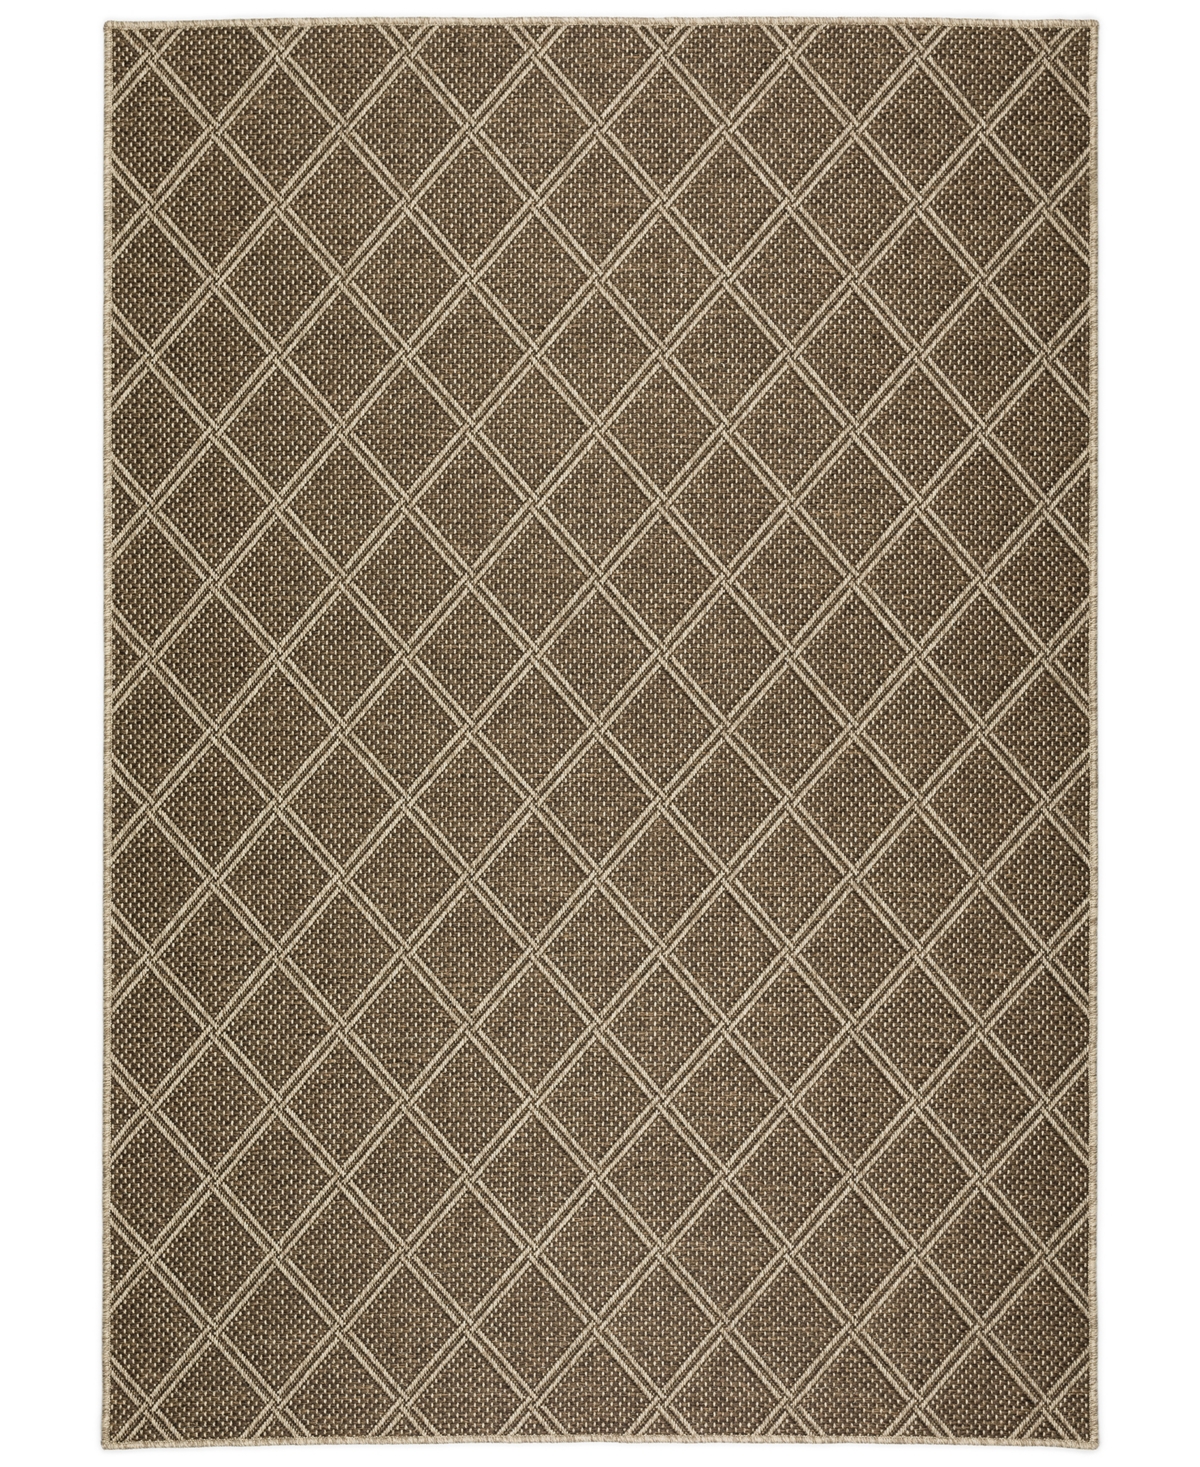 Shop D Style Nusa Outdoor Nsa3 3' X 5' Area Rug In Chocolate